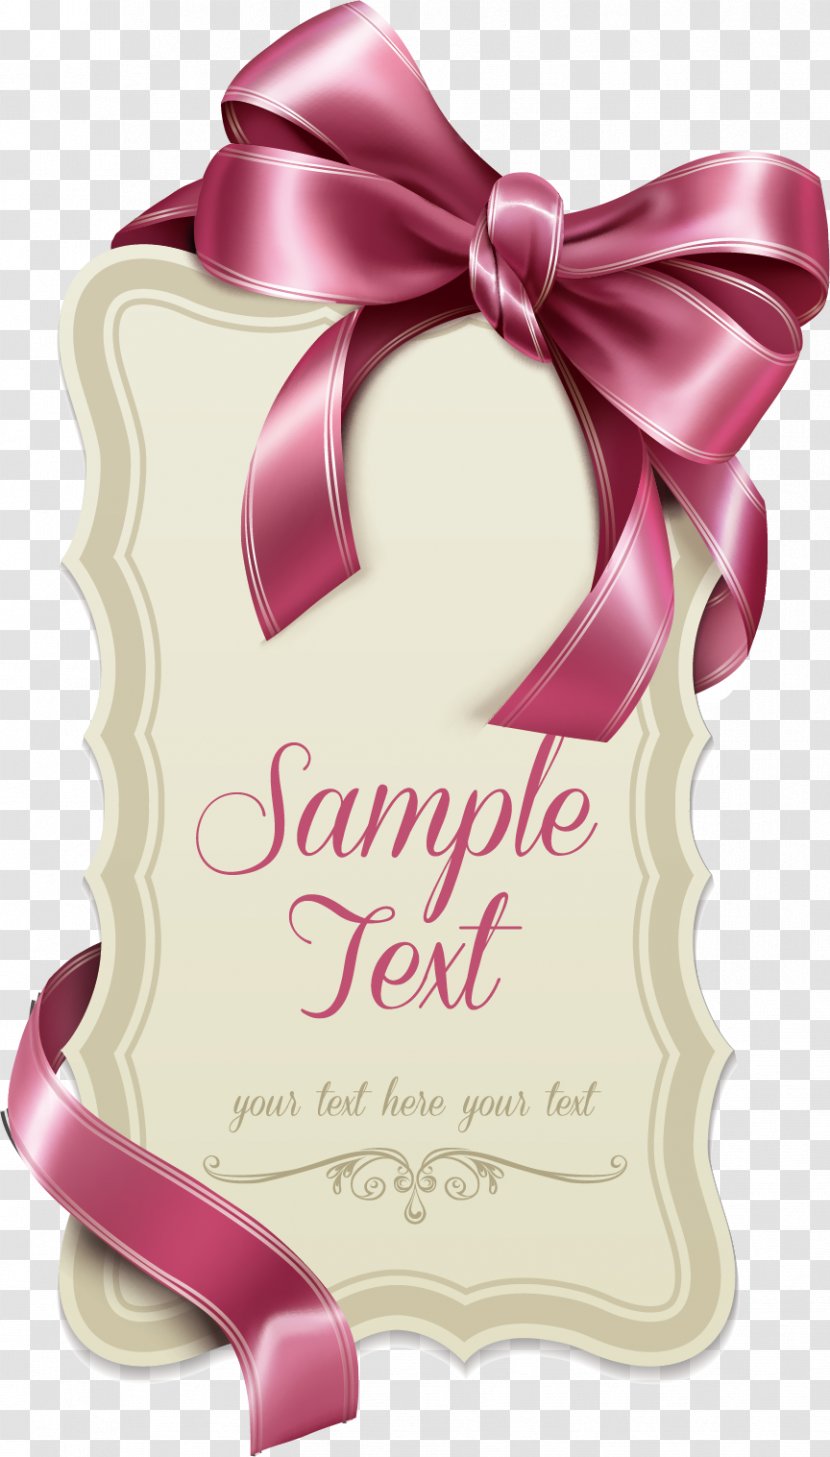 Clip Art - Ribbon - Exquisite Bow Gift Card Transparent PNG